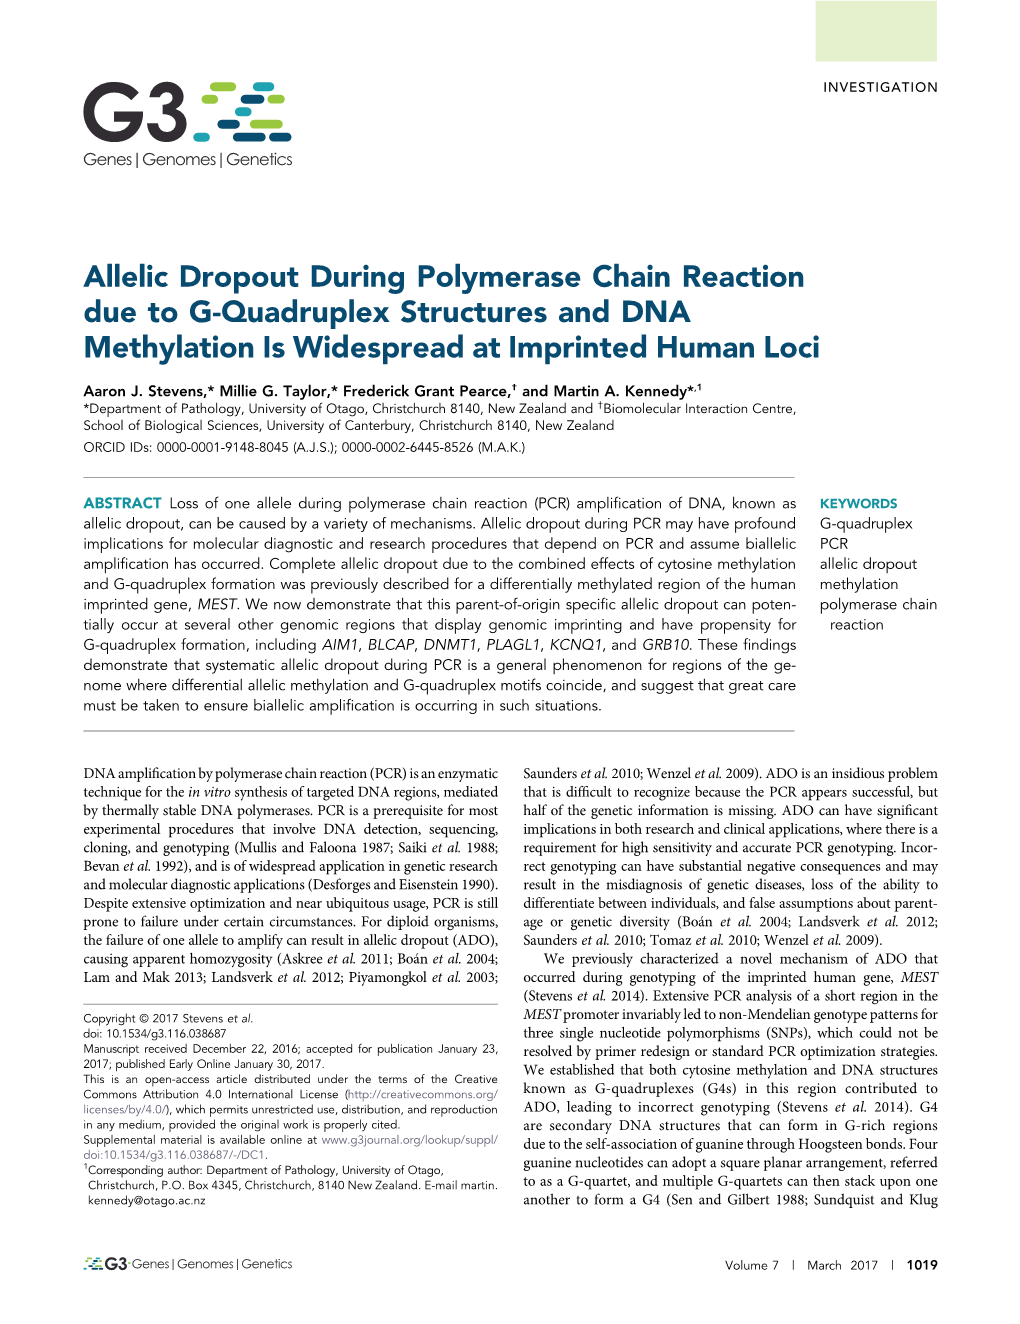 Allelic Dropout During Polymerase Chain Reaction Due to G-Quadruplex Structures and DNA Methylation Is Widespread at Imprinted Human Loci